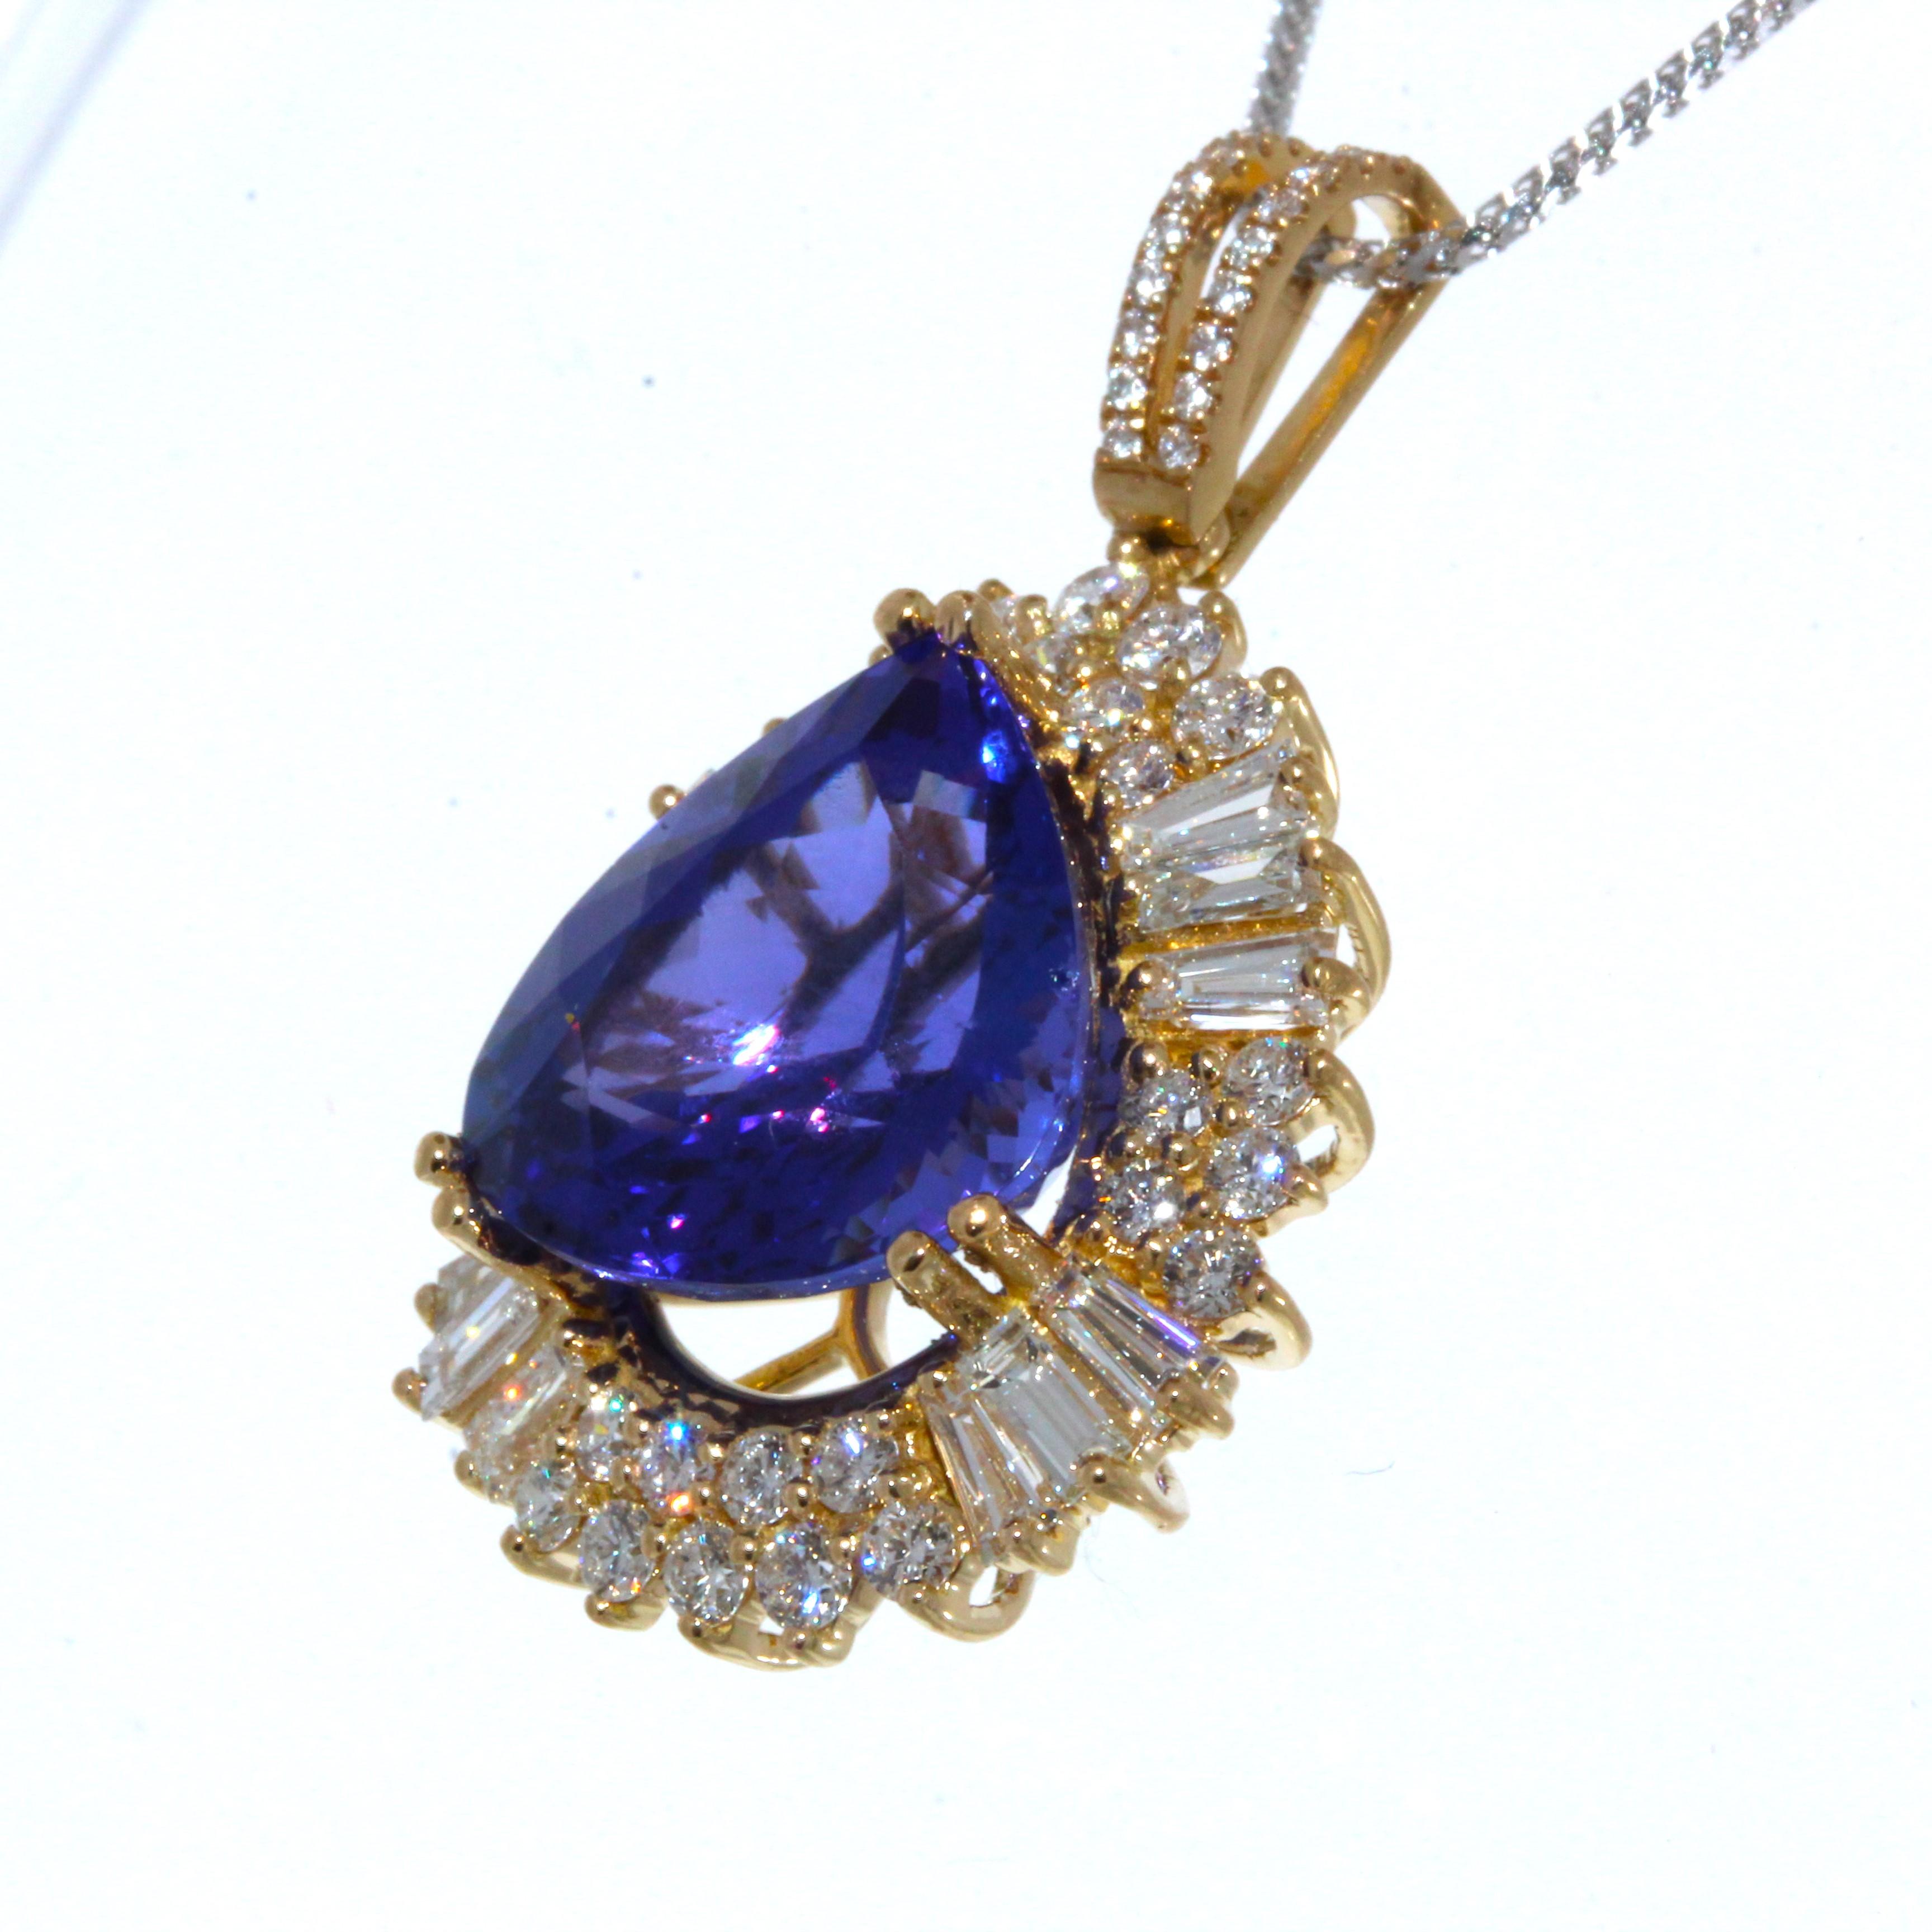 This lavish brightly polished 18 karat yellow gold smooth Pear shaped cocktail Pendant presents one hand selected fine quality Pear cut 9.38 CT tanzanite prong set in the center, originating from Tanzania with a beautiful color saturation. A total